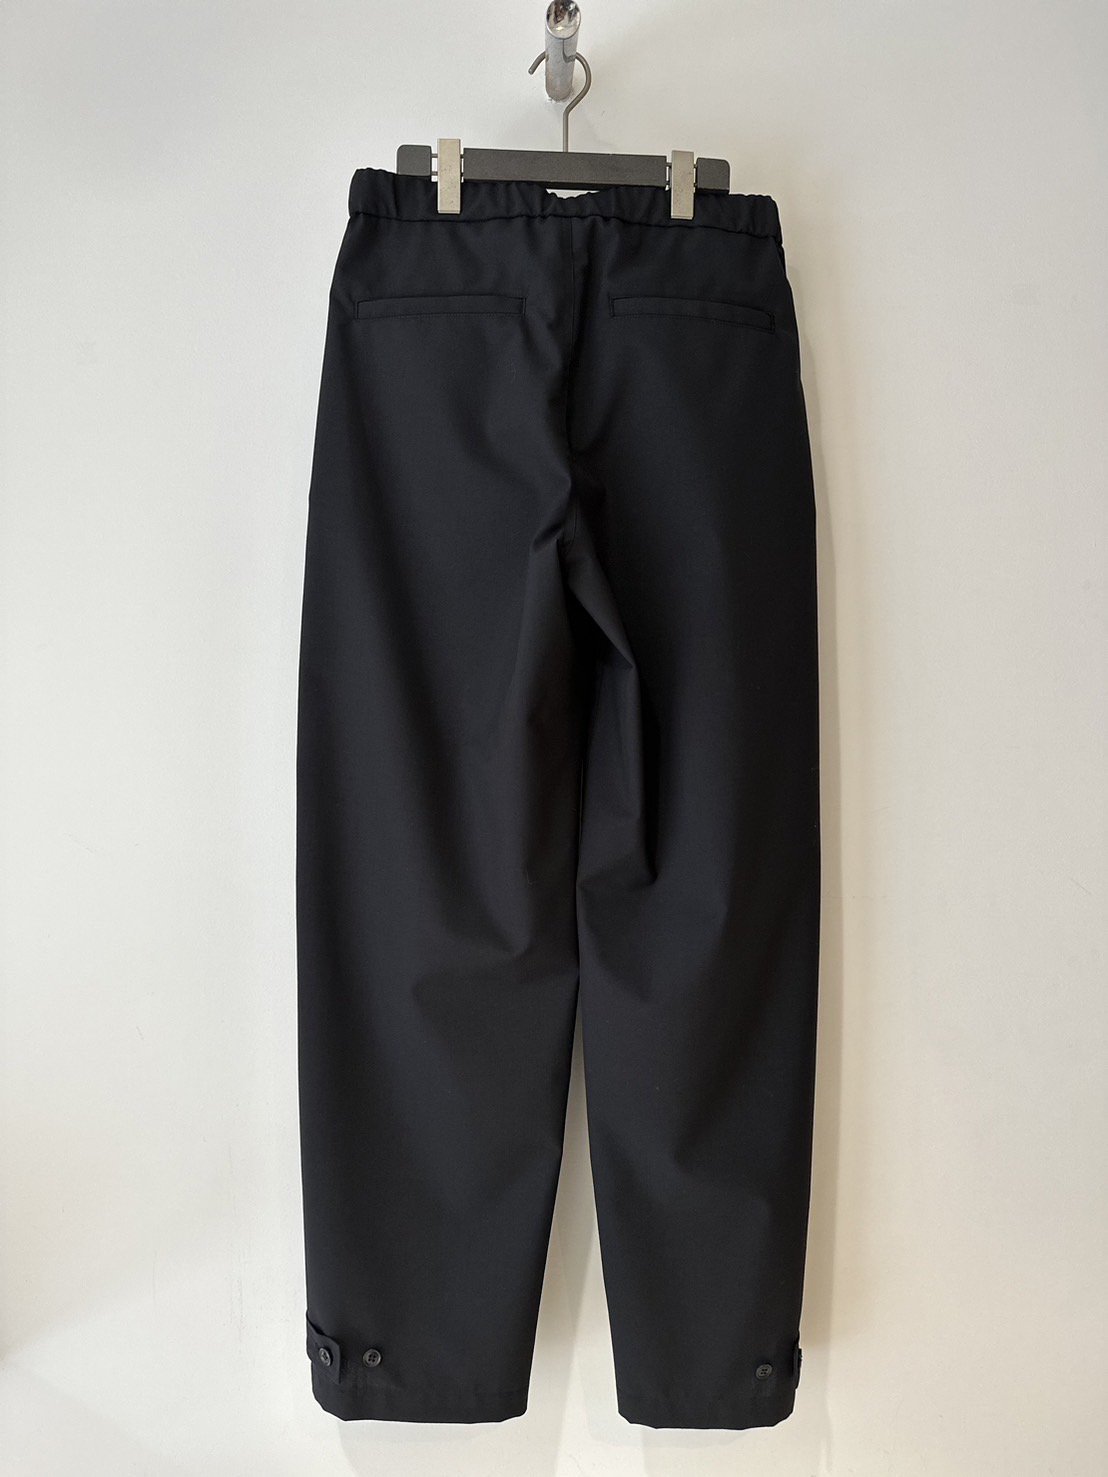 ALLEGE<br />Wool Easy Pants / Black<img class='new_mark_img2' src='https://img.shop-pro.jp/img/new/icons14.gif' style='border:none;display:inline;margin:0px;padding:0px;width:auto;' />